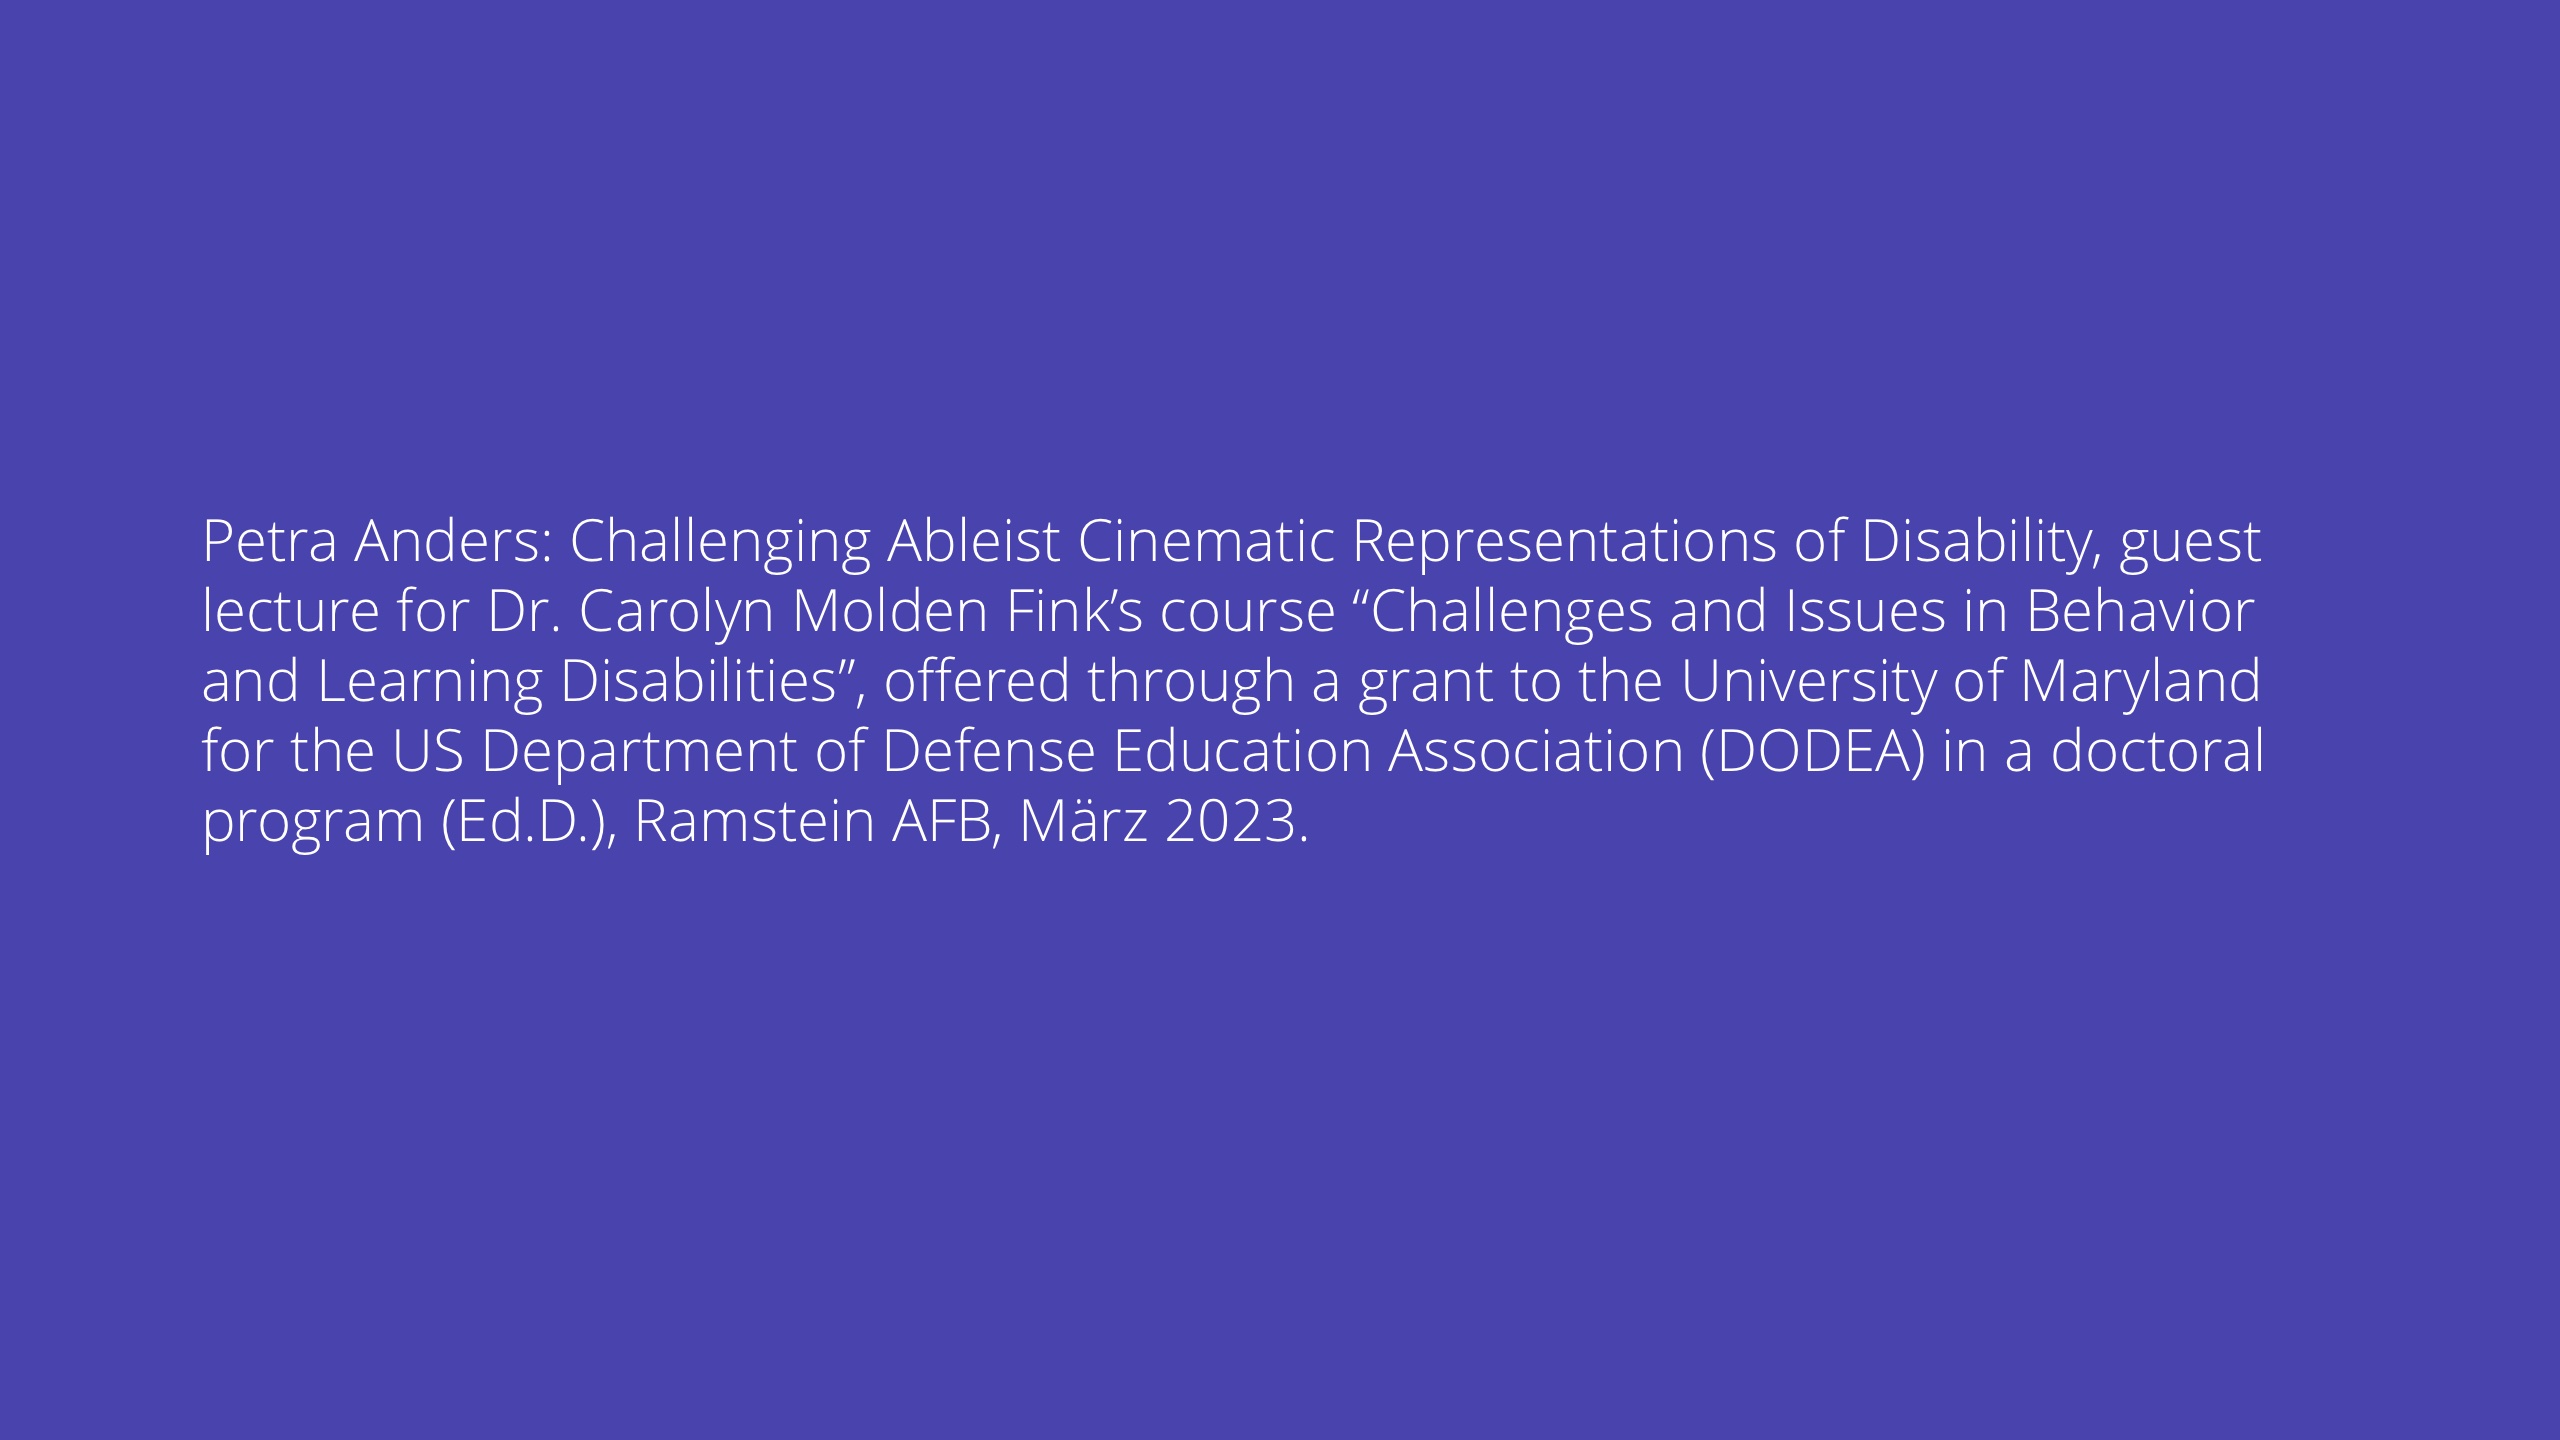 Petra Anders: Challenging Ableist Cinematic Representations of Disability, guest lecture for Dr. Carolyn Molden Fink’s course “Challenges and Issues in Behavior and Learning Disabilities”, offered through a grant to the University of Maryland for the US Department of Defense Education Association (DODEA) in a doctoral program (Ed.D.), Ramstein AFB, März 2023.